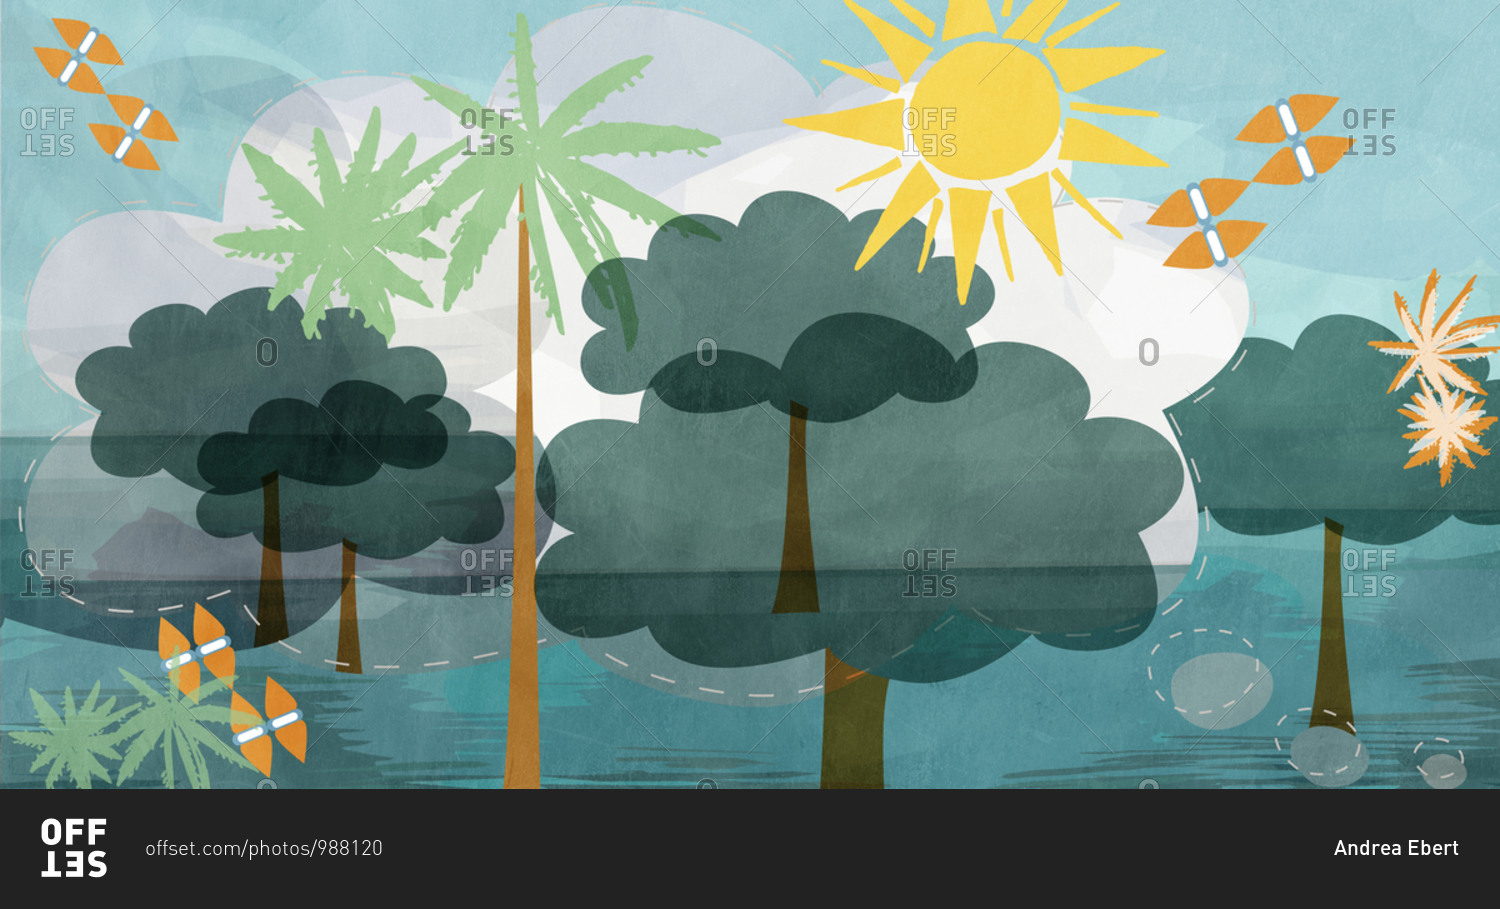 Tropical scenery illustration with trees, water and sunshine